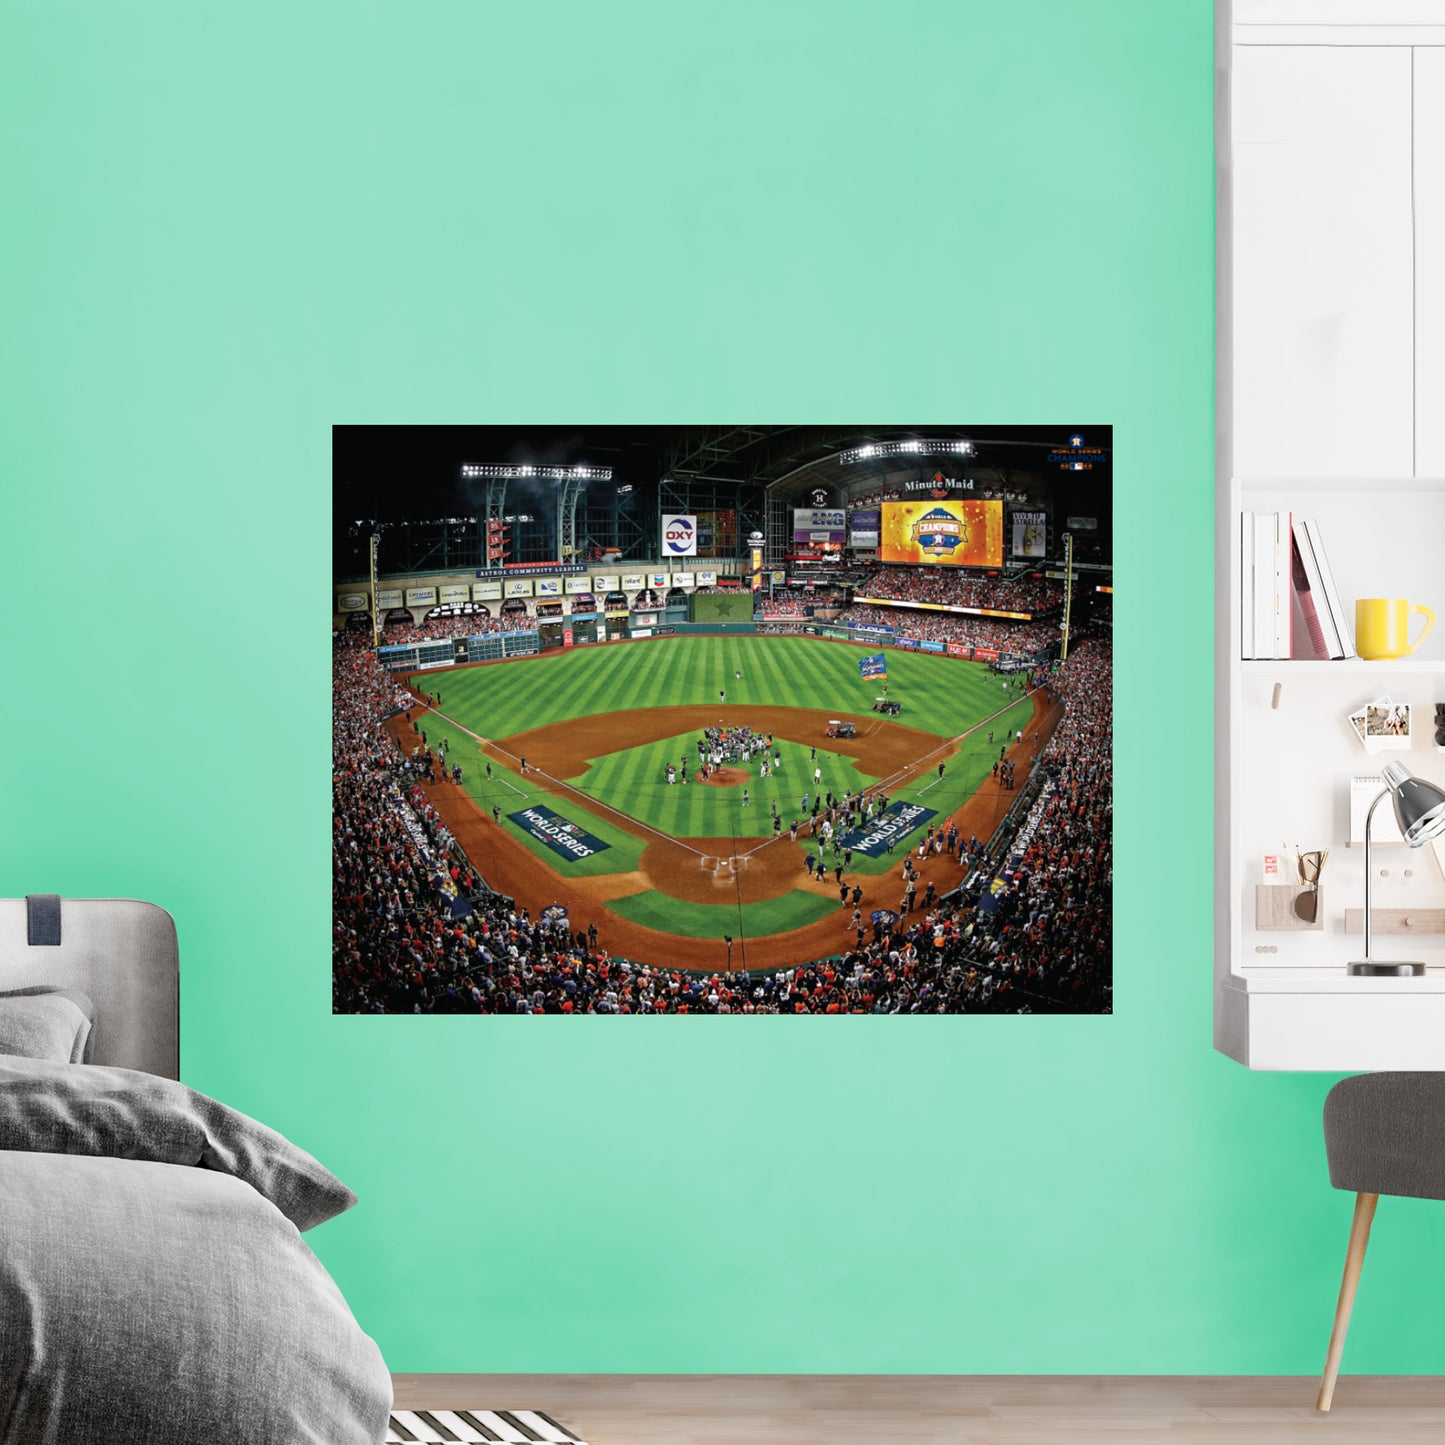 Houston Astros: 2022 World Series Stadium Wide Shot Poster - Officially Licensed MLB Removable Adhesive Decal